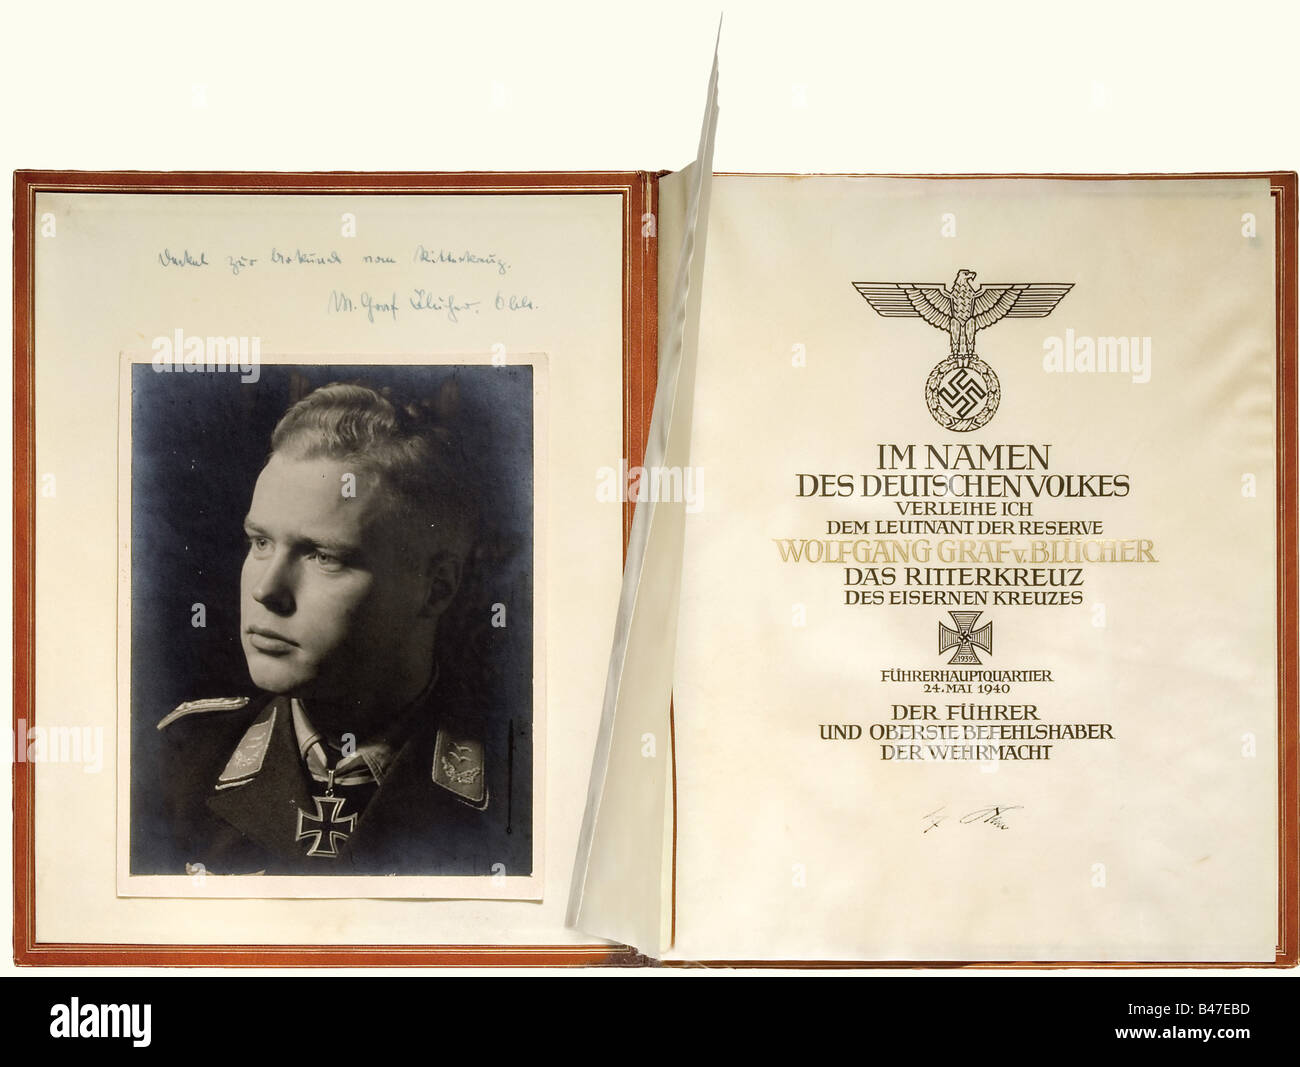 Oberleutnant (First Lieutenant) Wolfgang Count von Blücher - the citation, and folder for the award of the Knight's Cross of the Iron Cross 1939 on 24 May 1940. Large format, double parchment sheet with calligraphic citation text, hand written in dark brown ink and raised gold above Hitler's signature in ink. Respectable condition, the parchment has minimal staining and fold marks. In the red leather award folder decoratively stamped in gold. Interior lined with parchment, signed 'Frieda Thiersch' on lower right side. There is a hand written comment in ink, 'De, Stock Photo